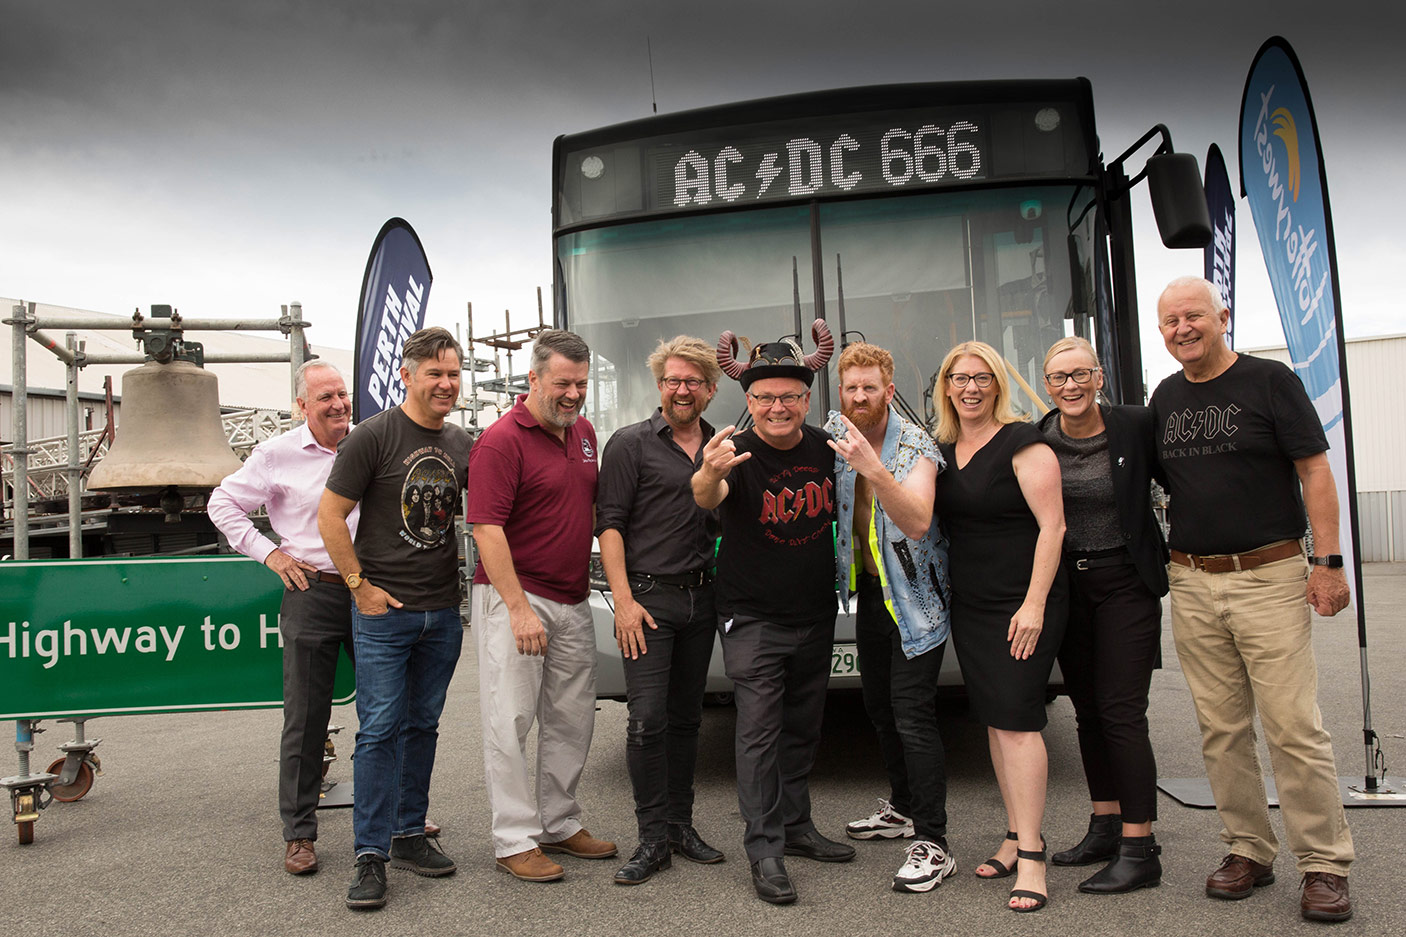 Highway to Hell: Minister David Templeman and Minister Rita Saffioti with organisers of the Highway to Hell in front of a Transperth Bus